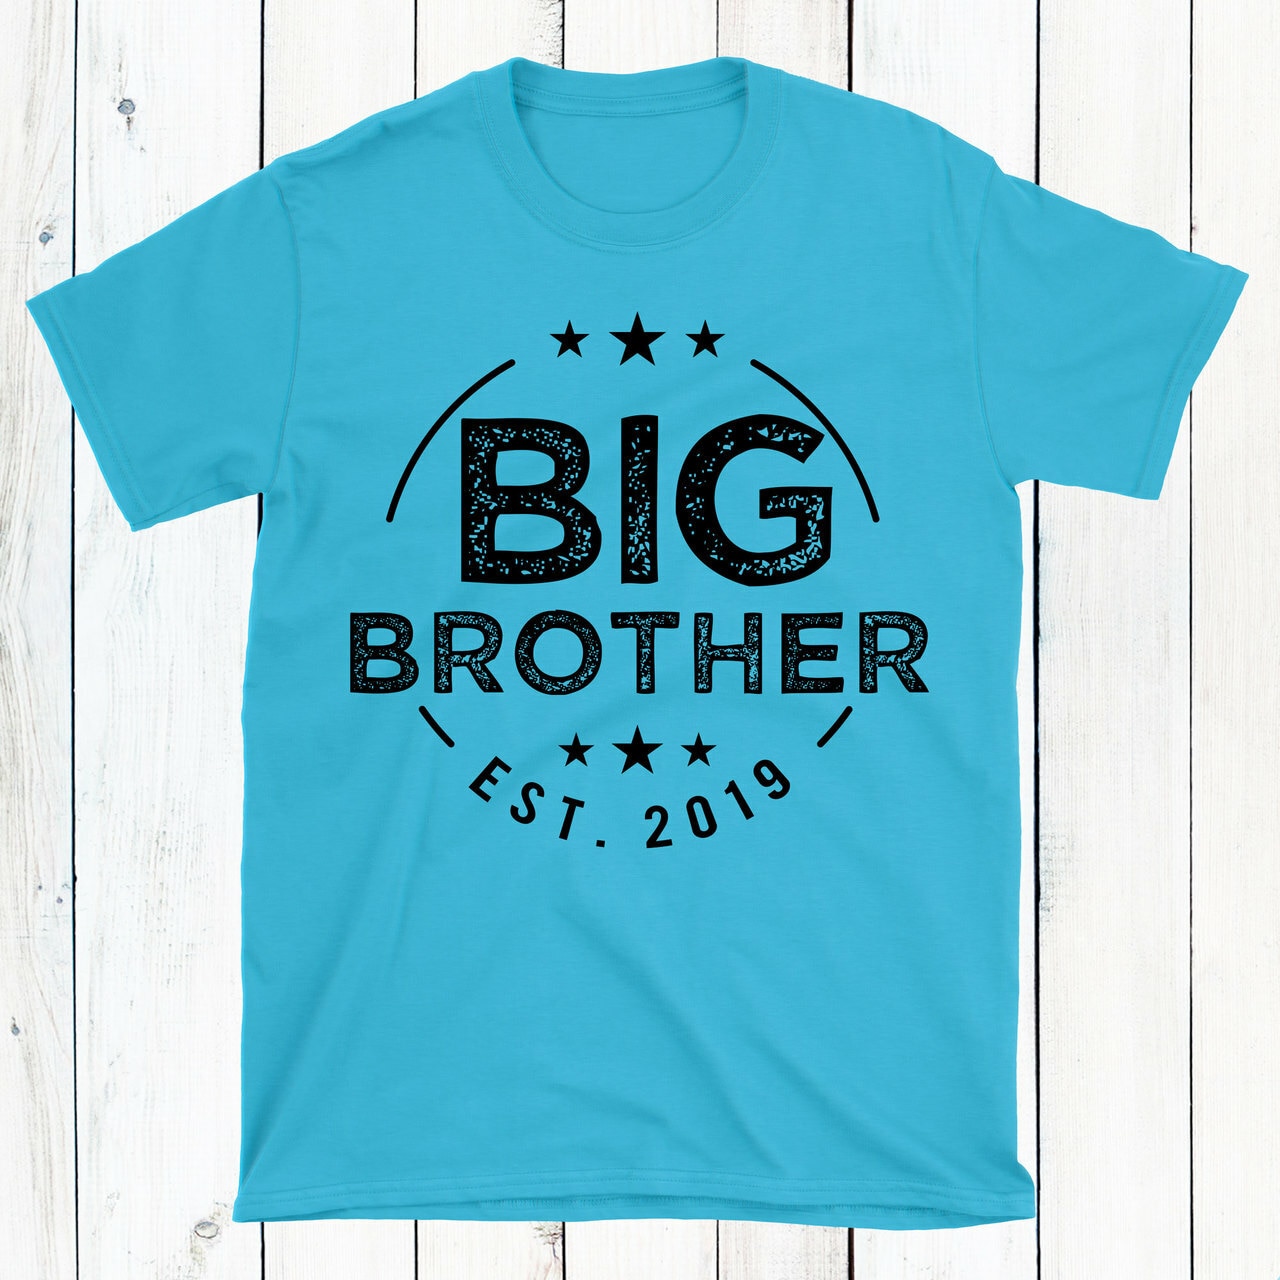 Why Choose A Big Brother Shirt?